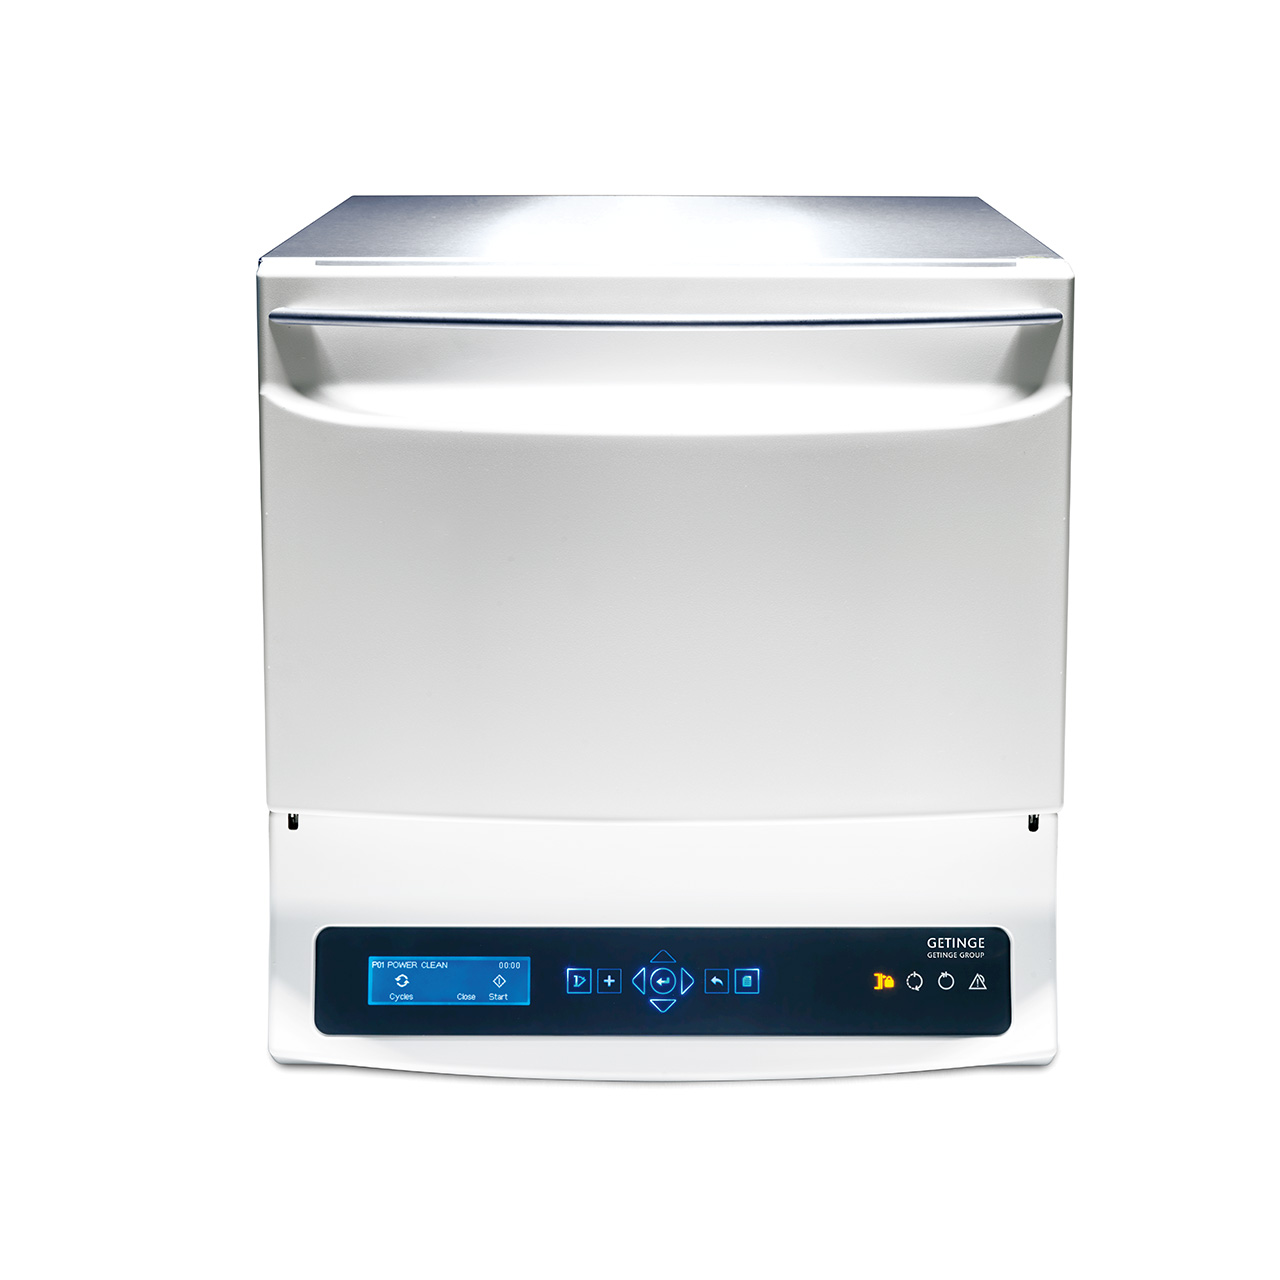 Getinge WD14 Tablo is a tabletop washer-disinfector with modern design and multifunctional washing features